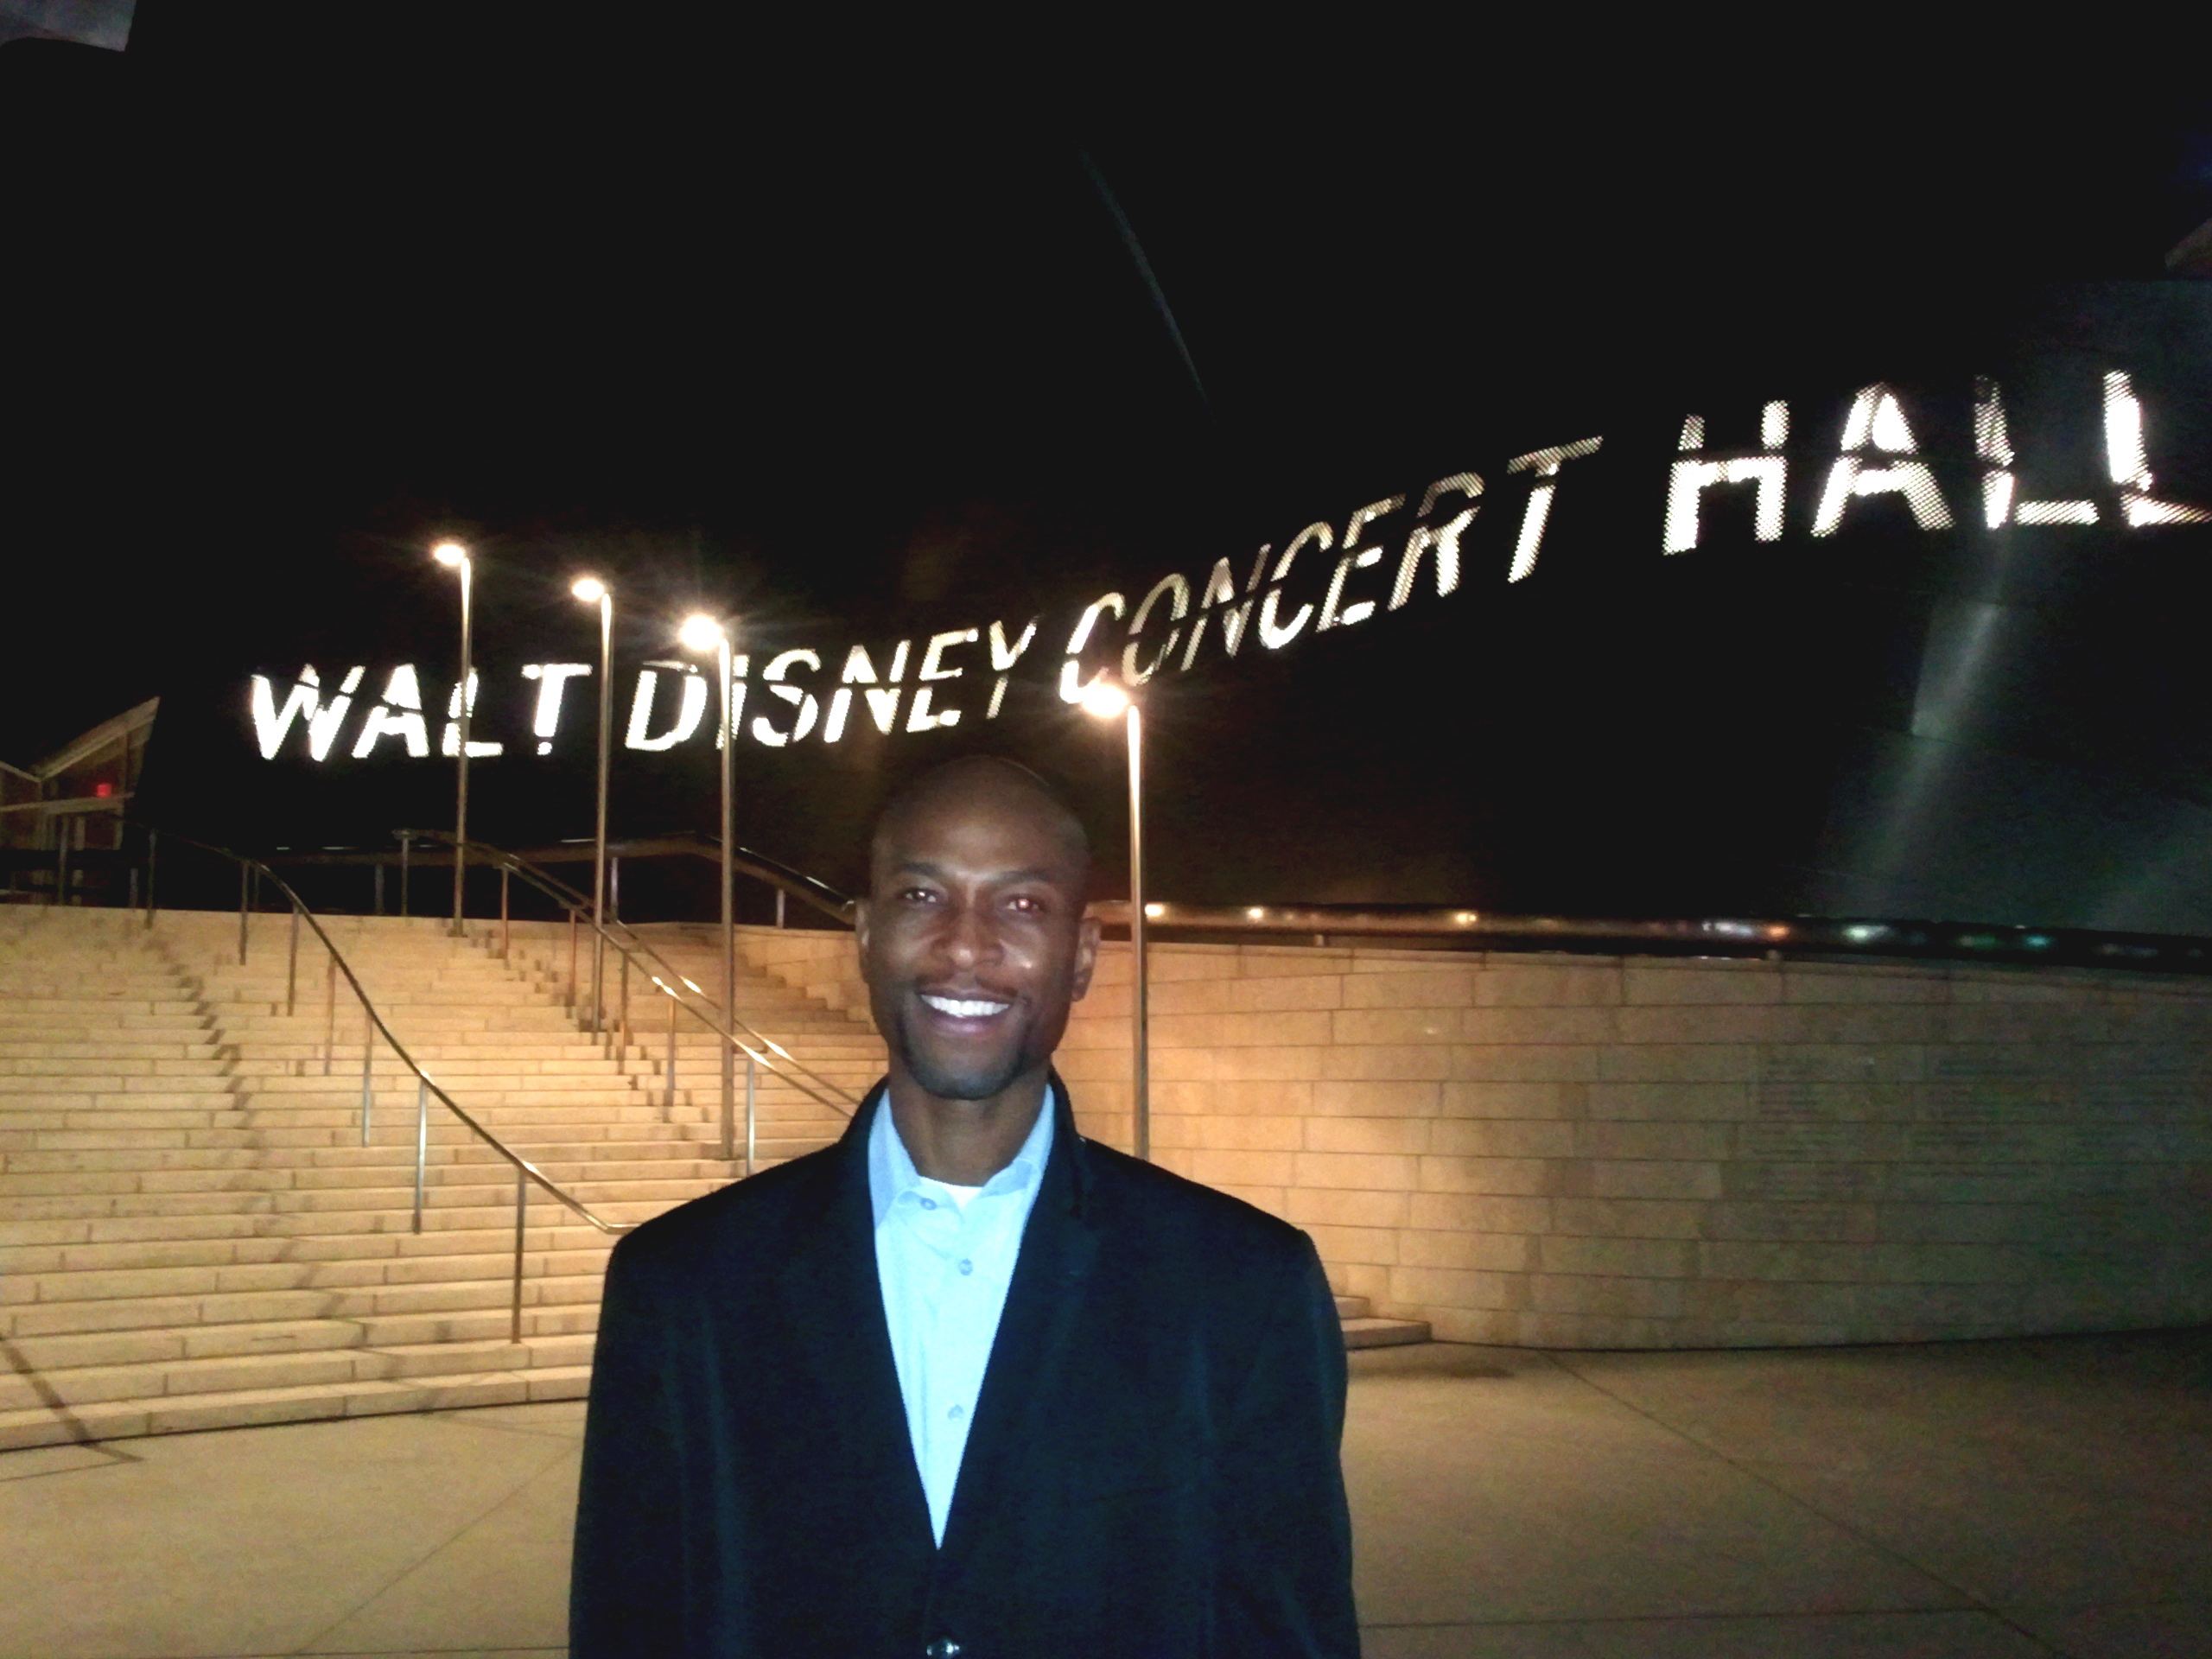 Gregory outside of Disney Concert Hall, 2012